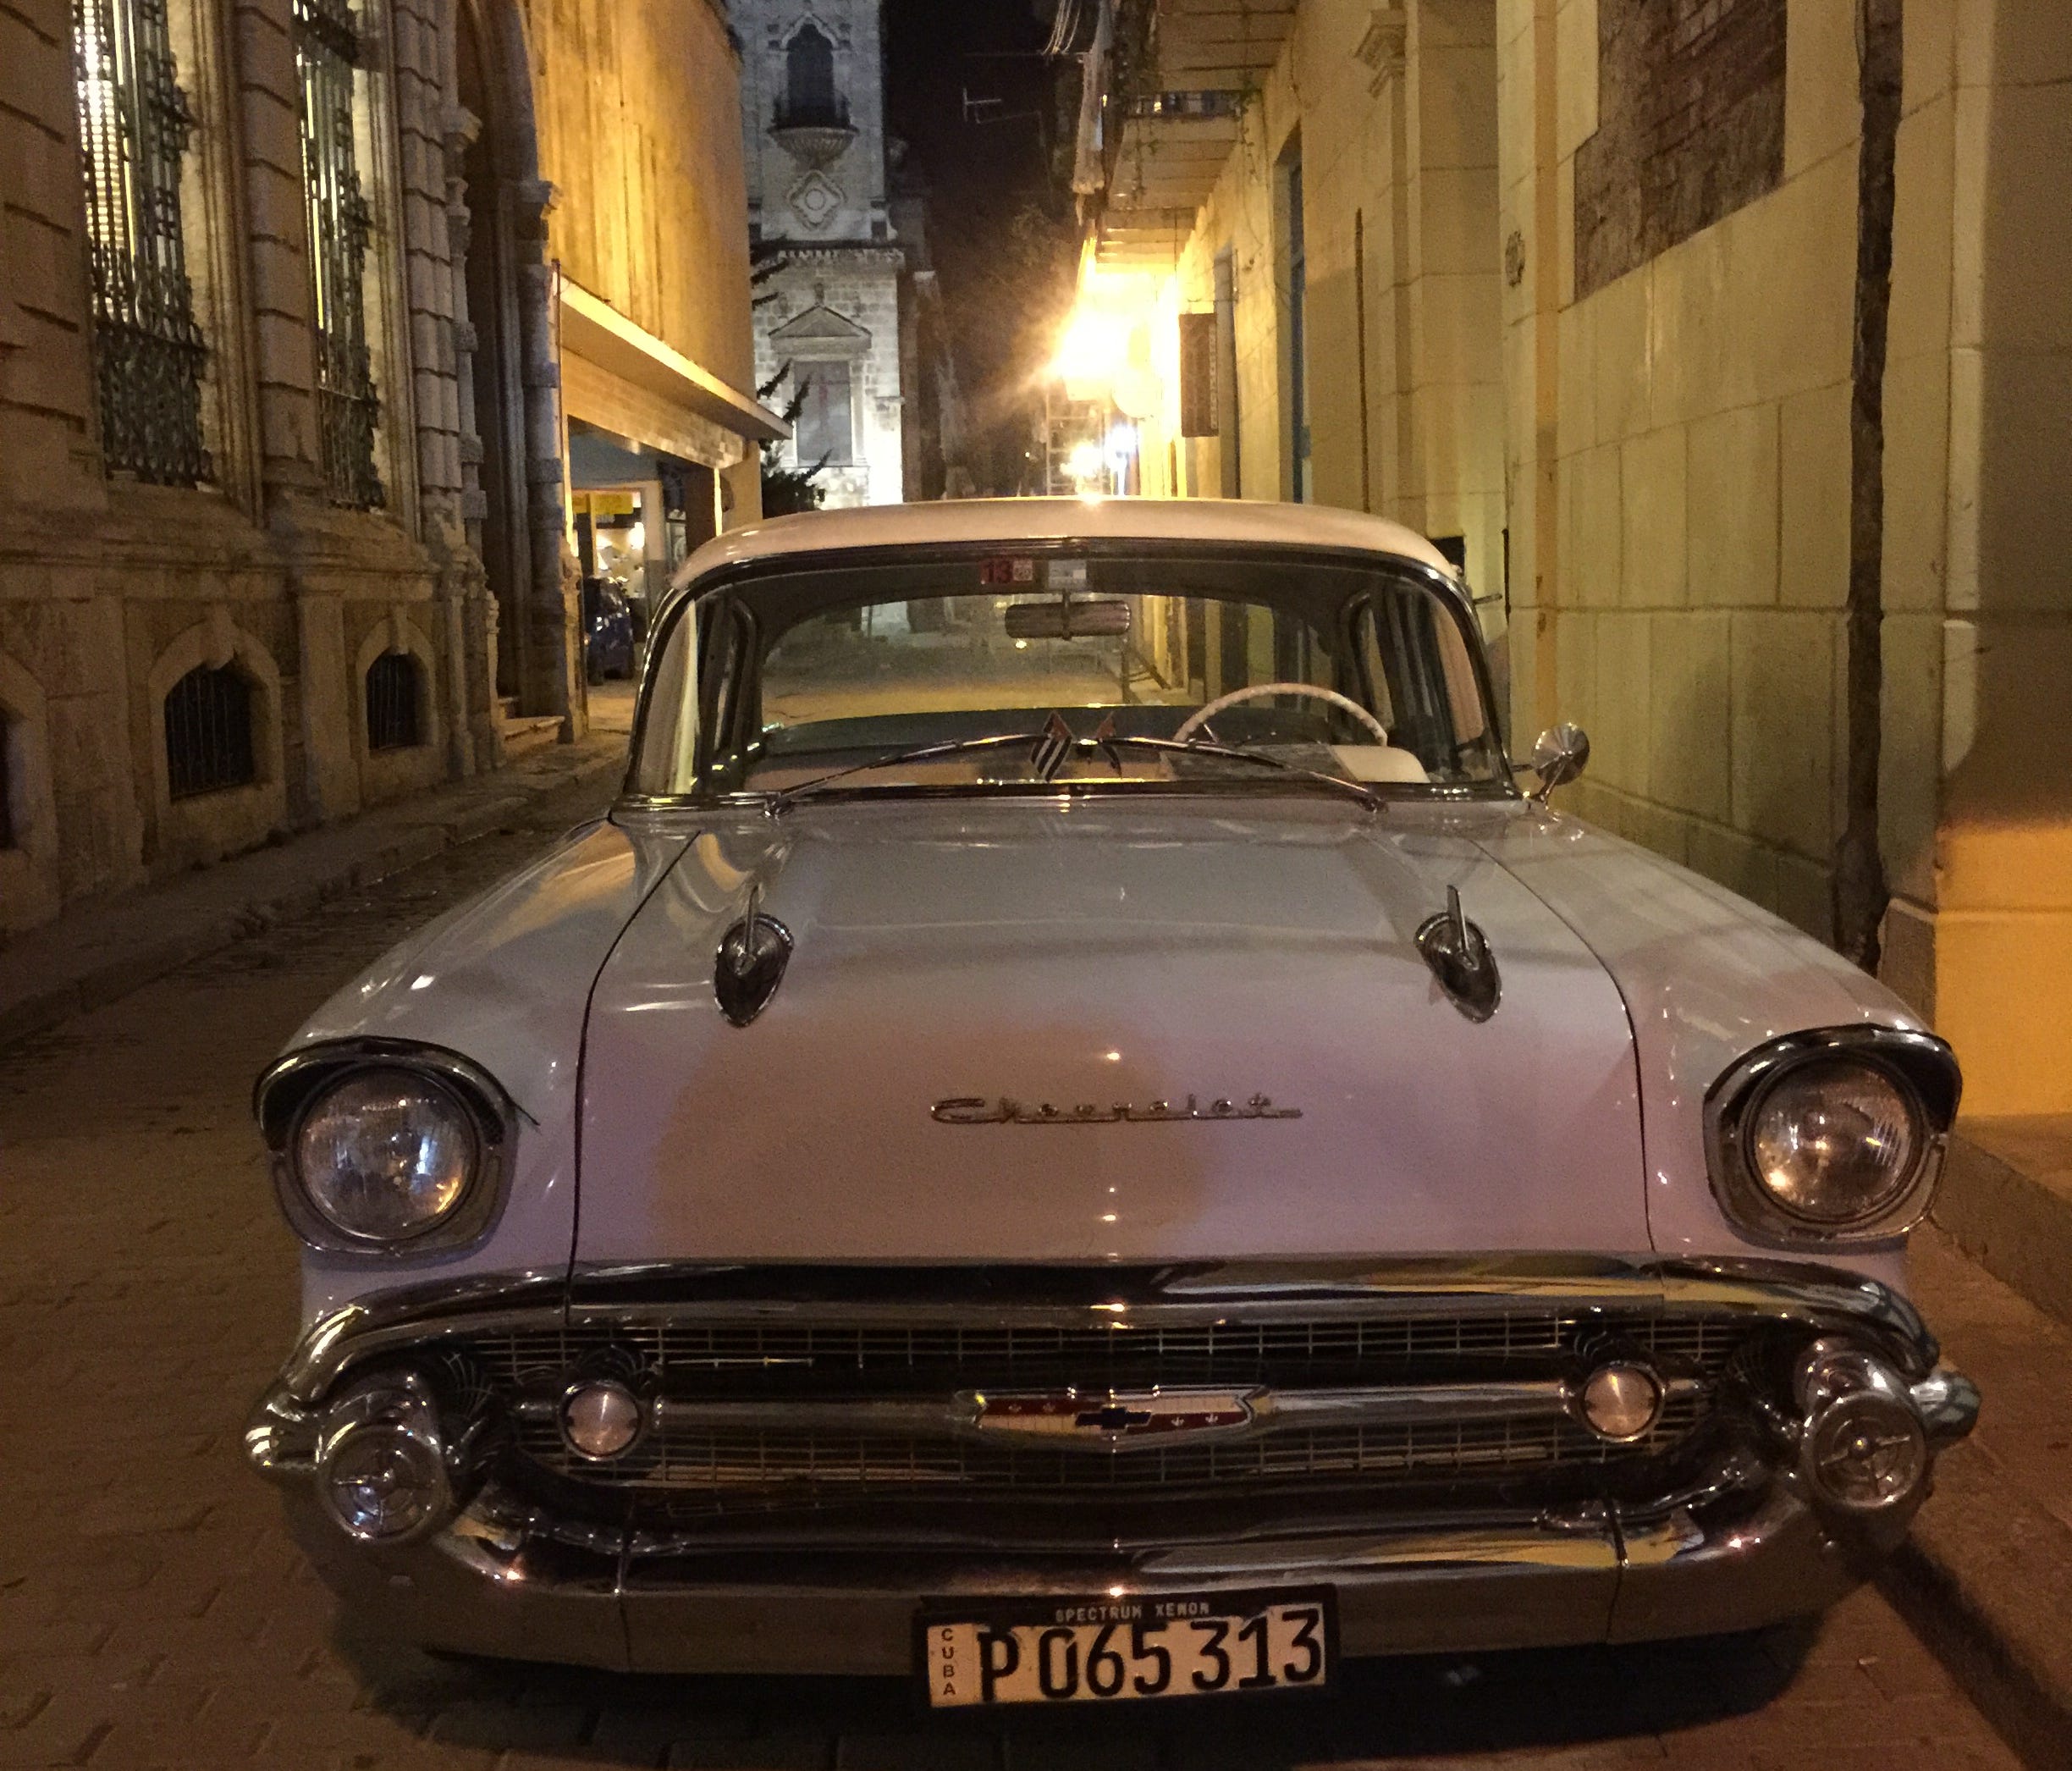 Cuba has a No. 3 travel advisory level because of recent attacks on U.S. Embassy employees in Havana, which has led to a drawdown of staff there. Cuba has become a popular destination ever since President Obama changed the rules to allow U.S. citizen